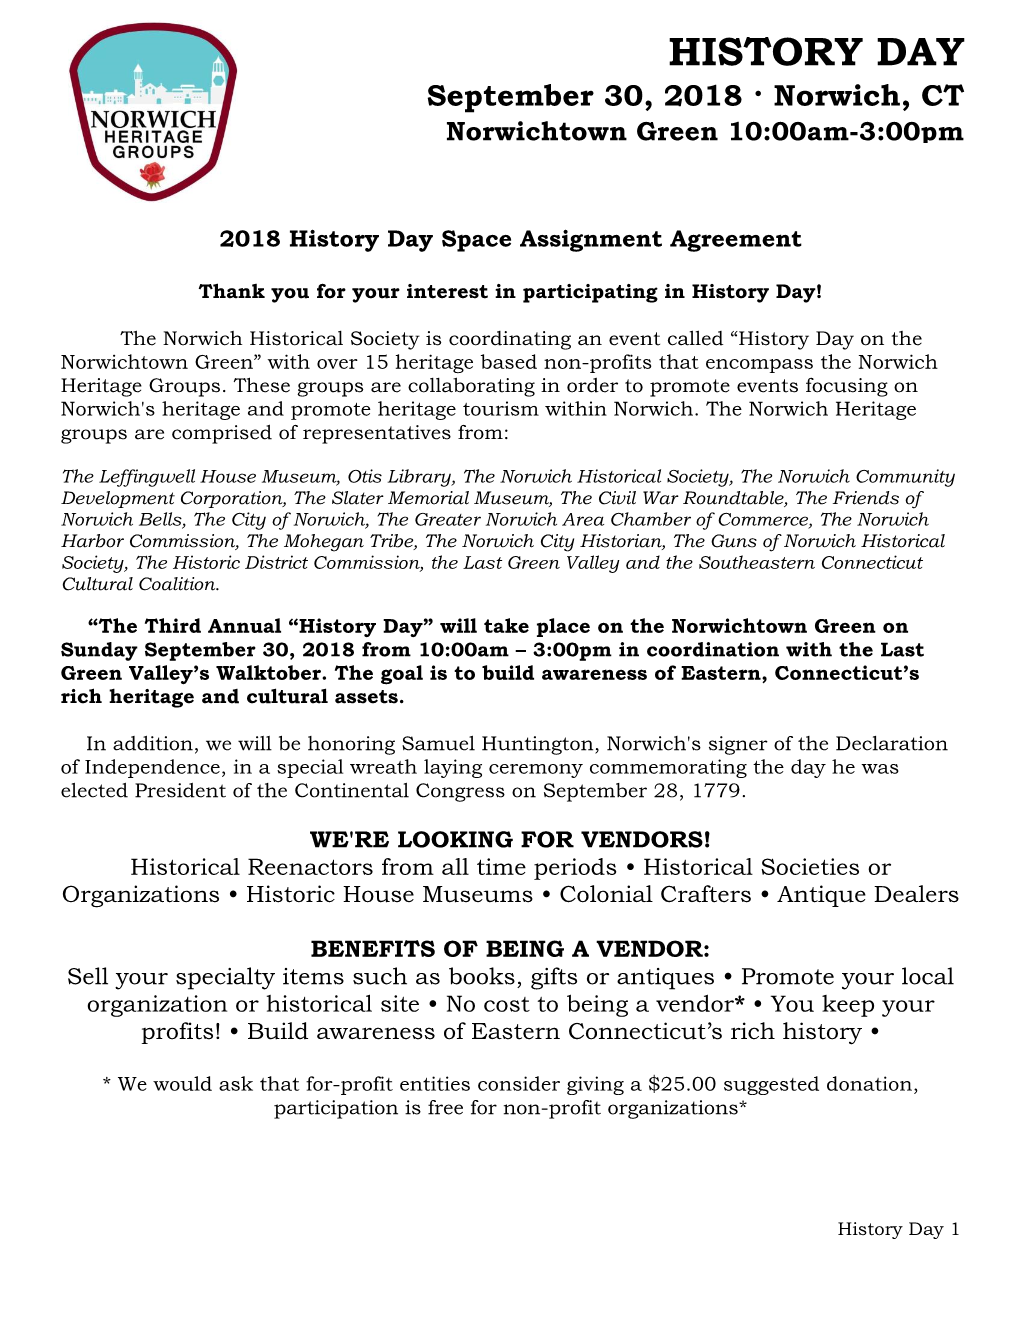 2018 History Day Space Assignment Agreement